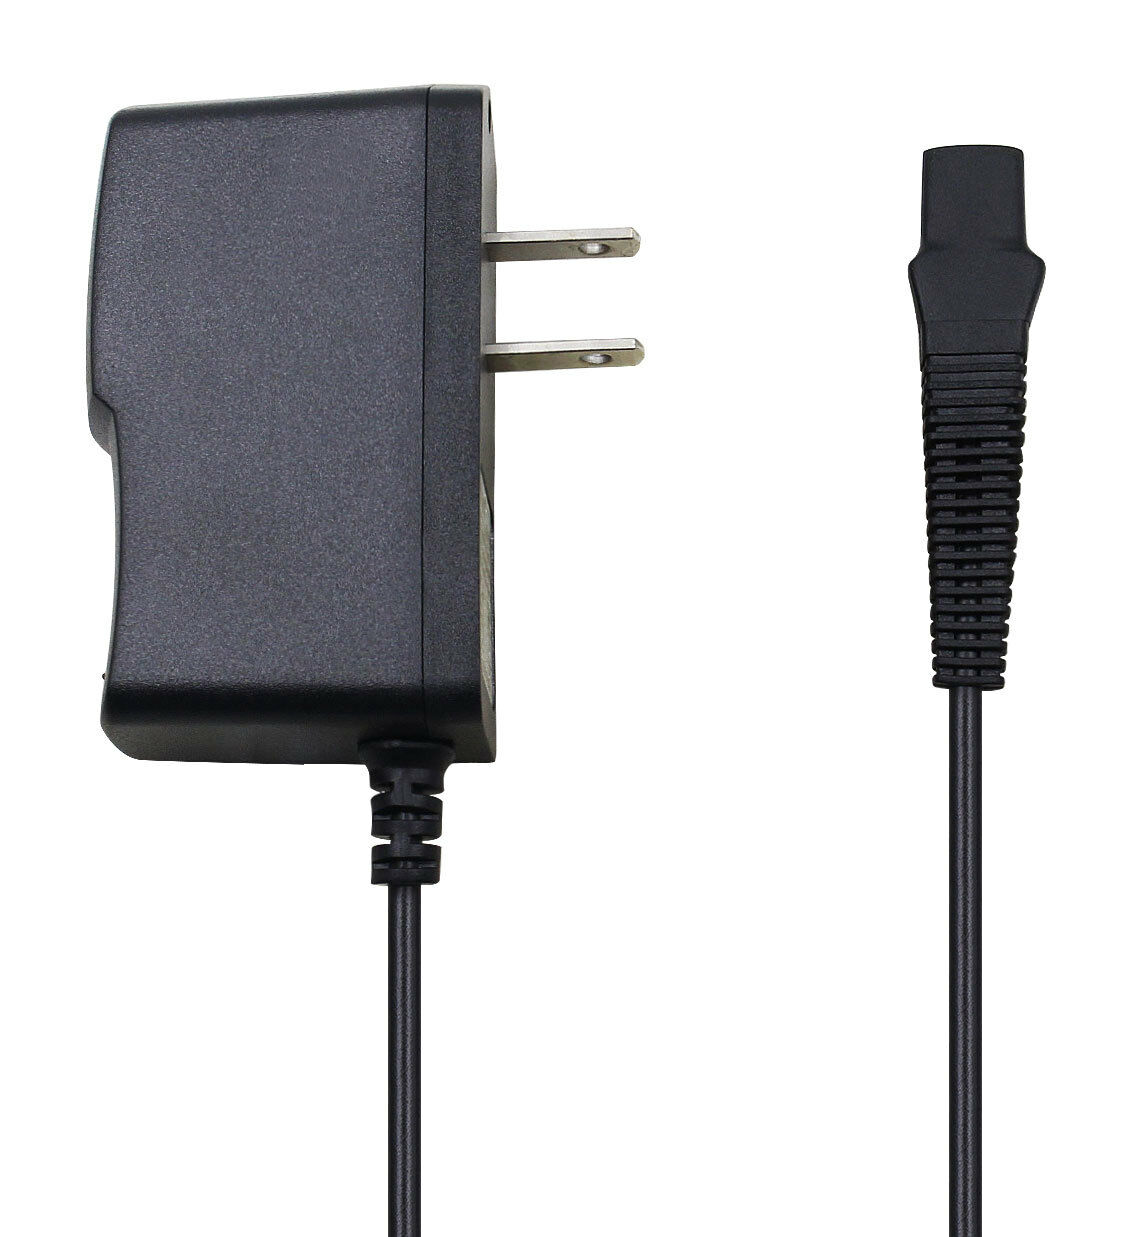 Braun 7781 Silk Epil AC Adapter Power Supply Cord Cable Charger Epilator